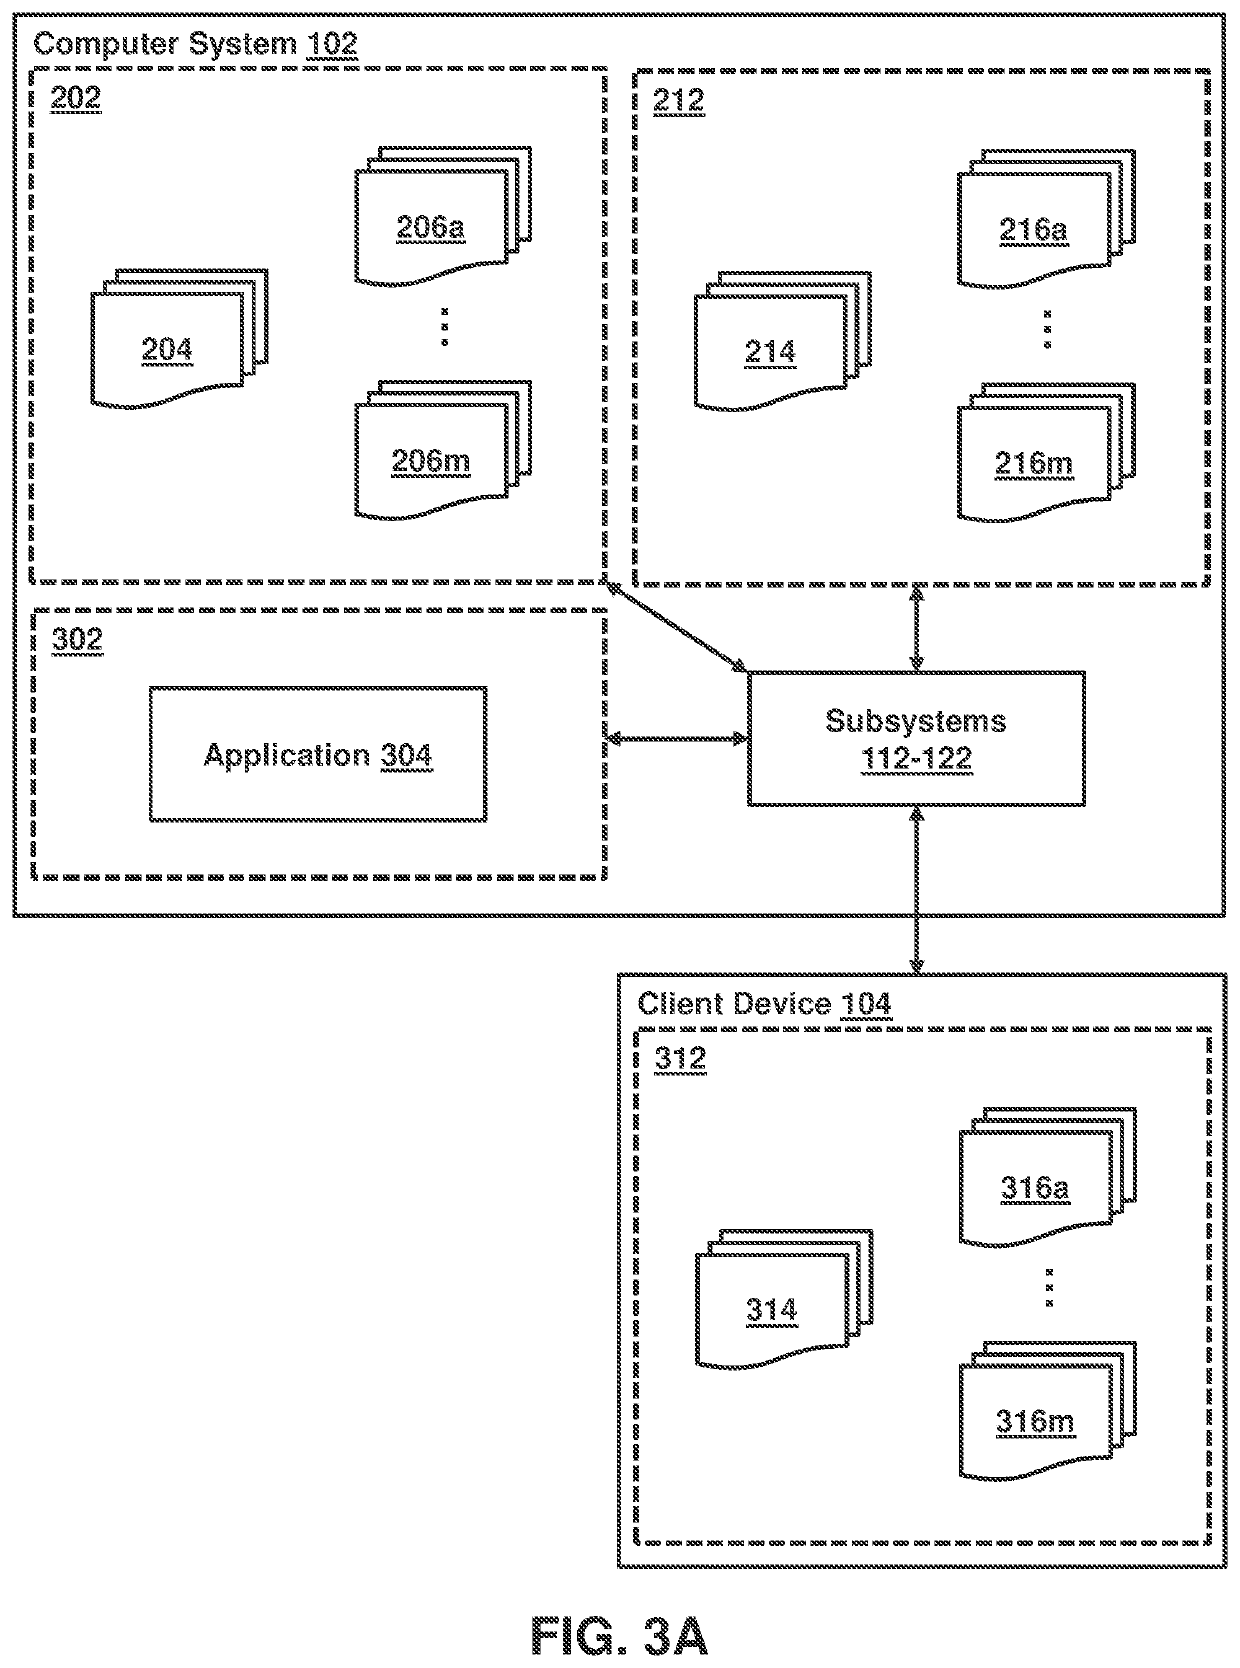 Multi-transfer resource allocation using modified instances of corresponding records in memory